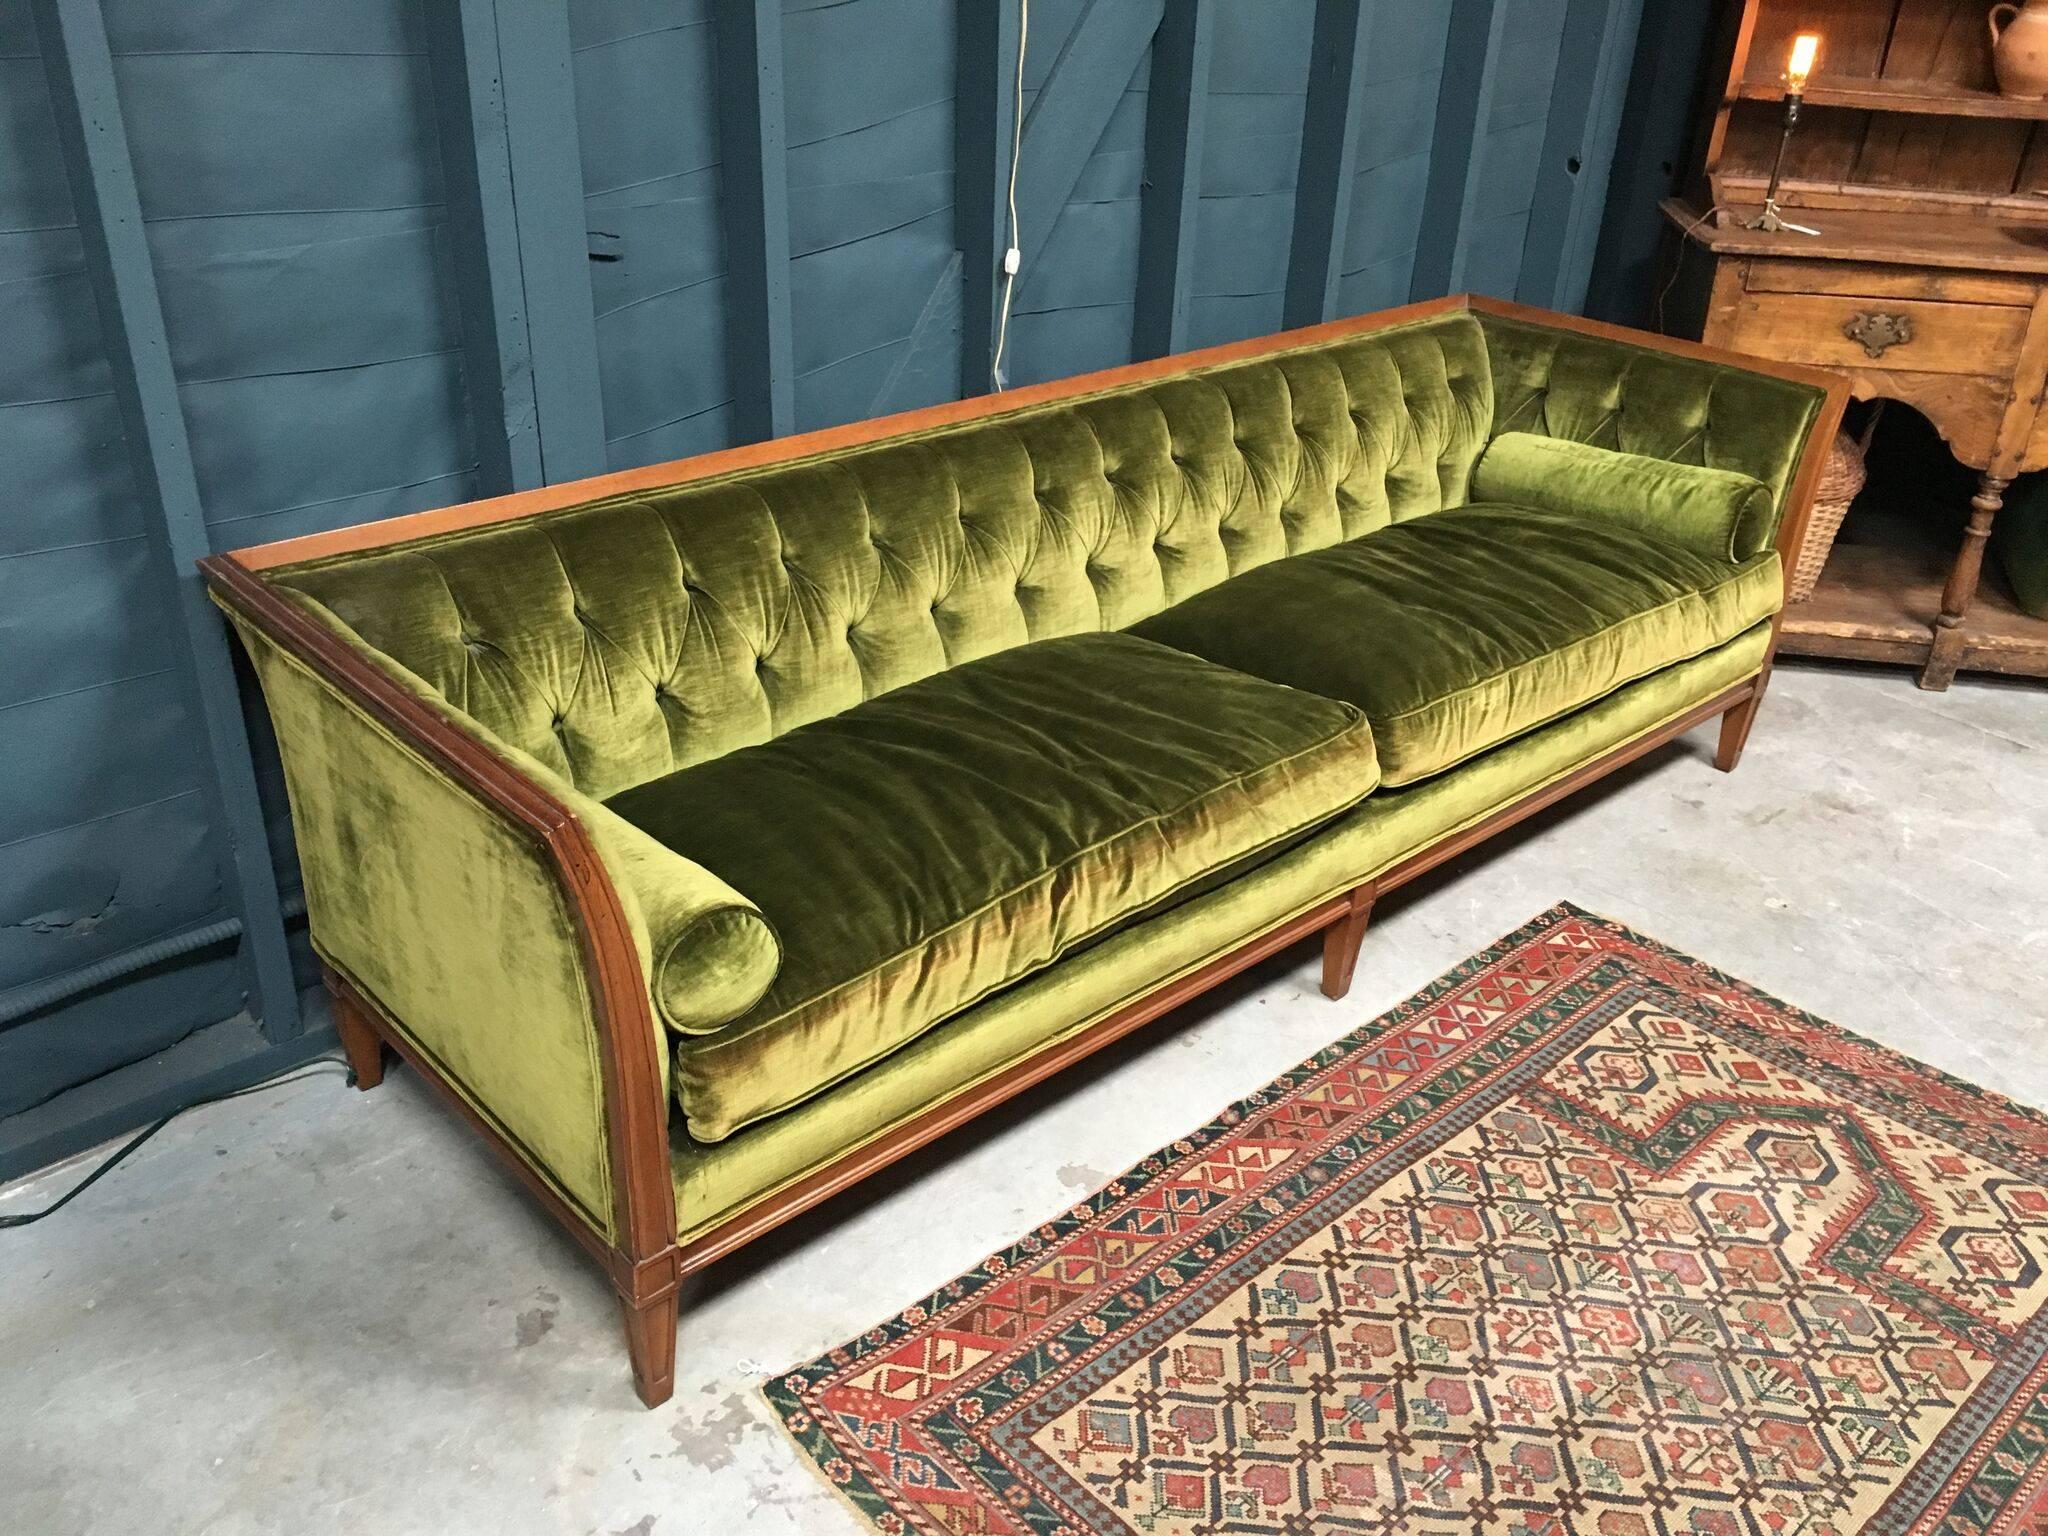 Beautiful green velvet sofa with two bolster pillows, from France and in great condition. Subtle Fabric reddening on front of cushions, but otherwise pristine.